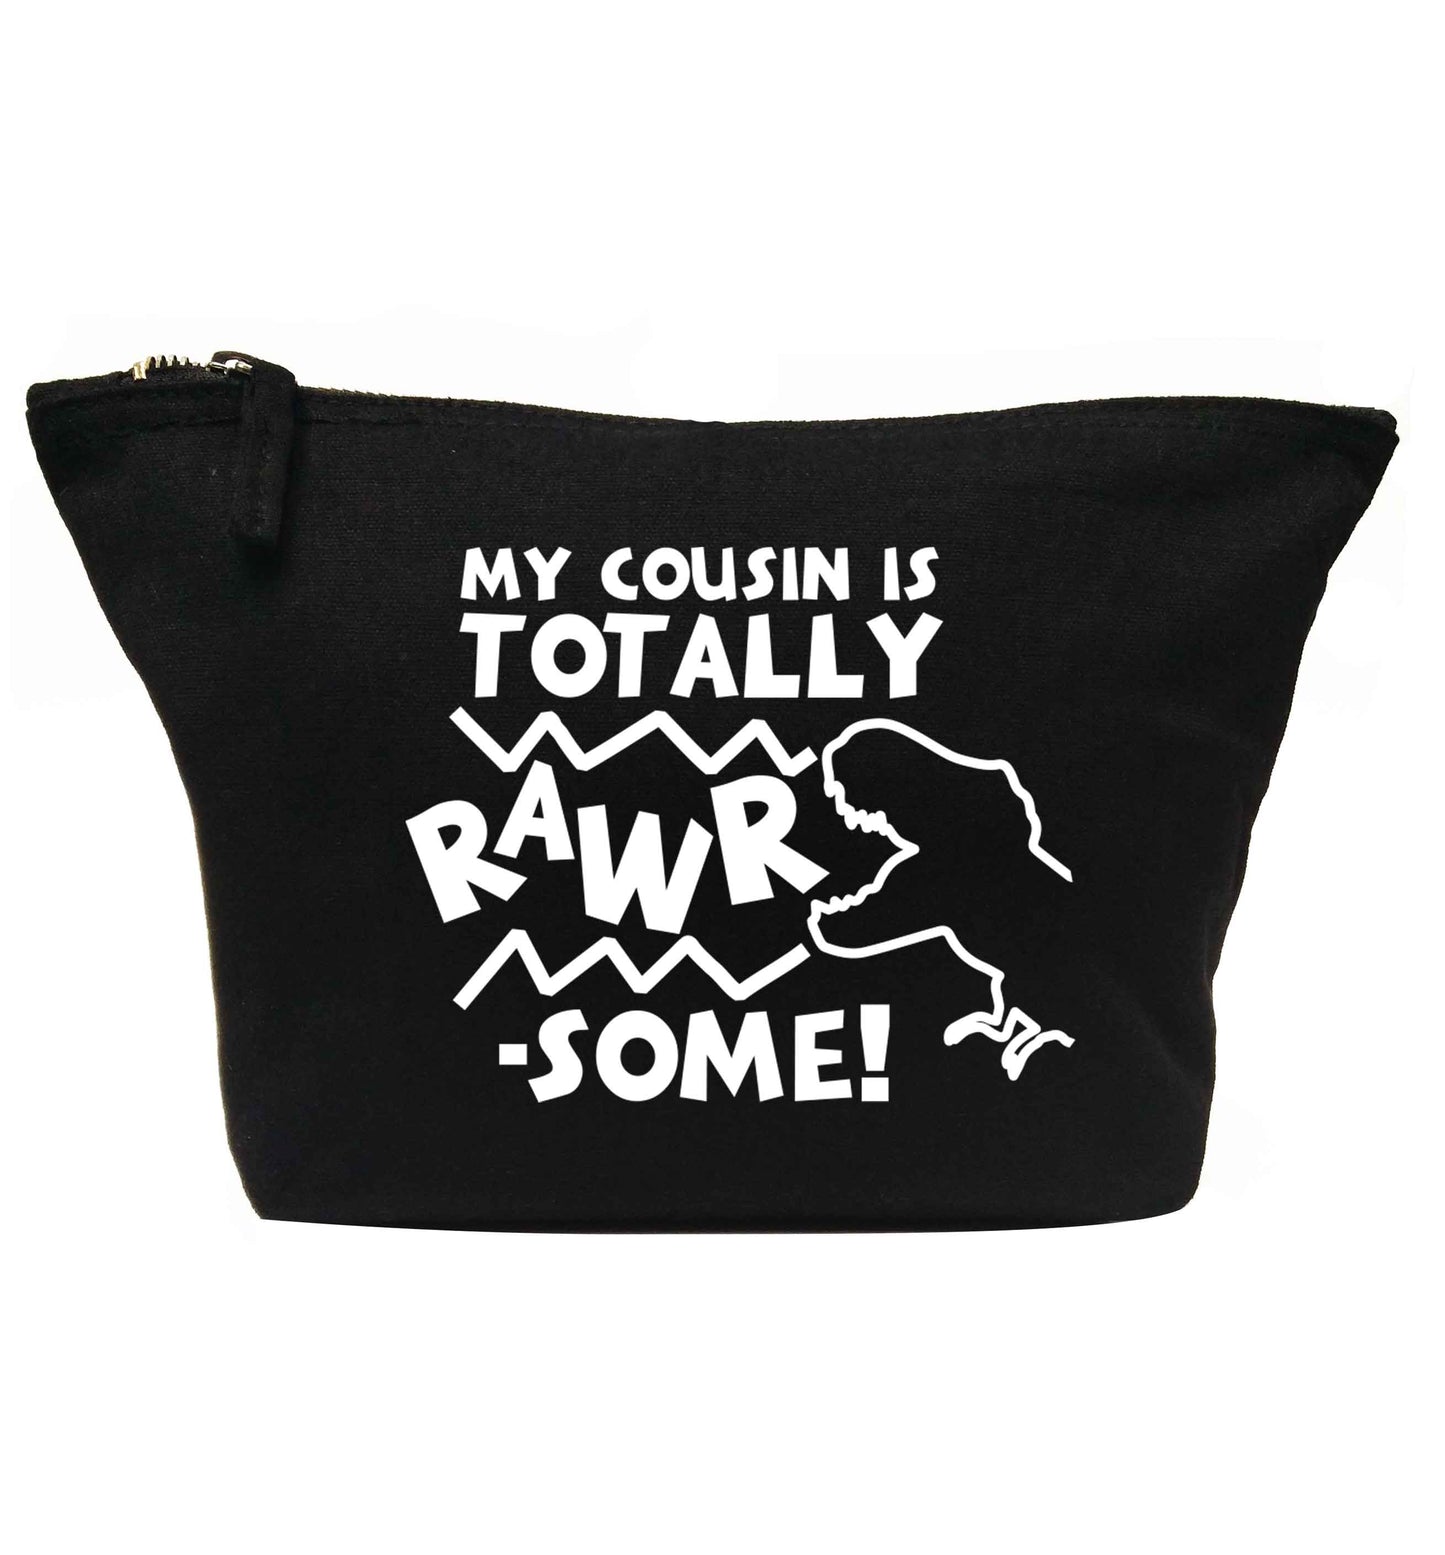 My cousin is totally rawrsome | Makeup / wash bag